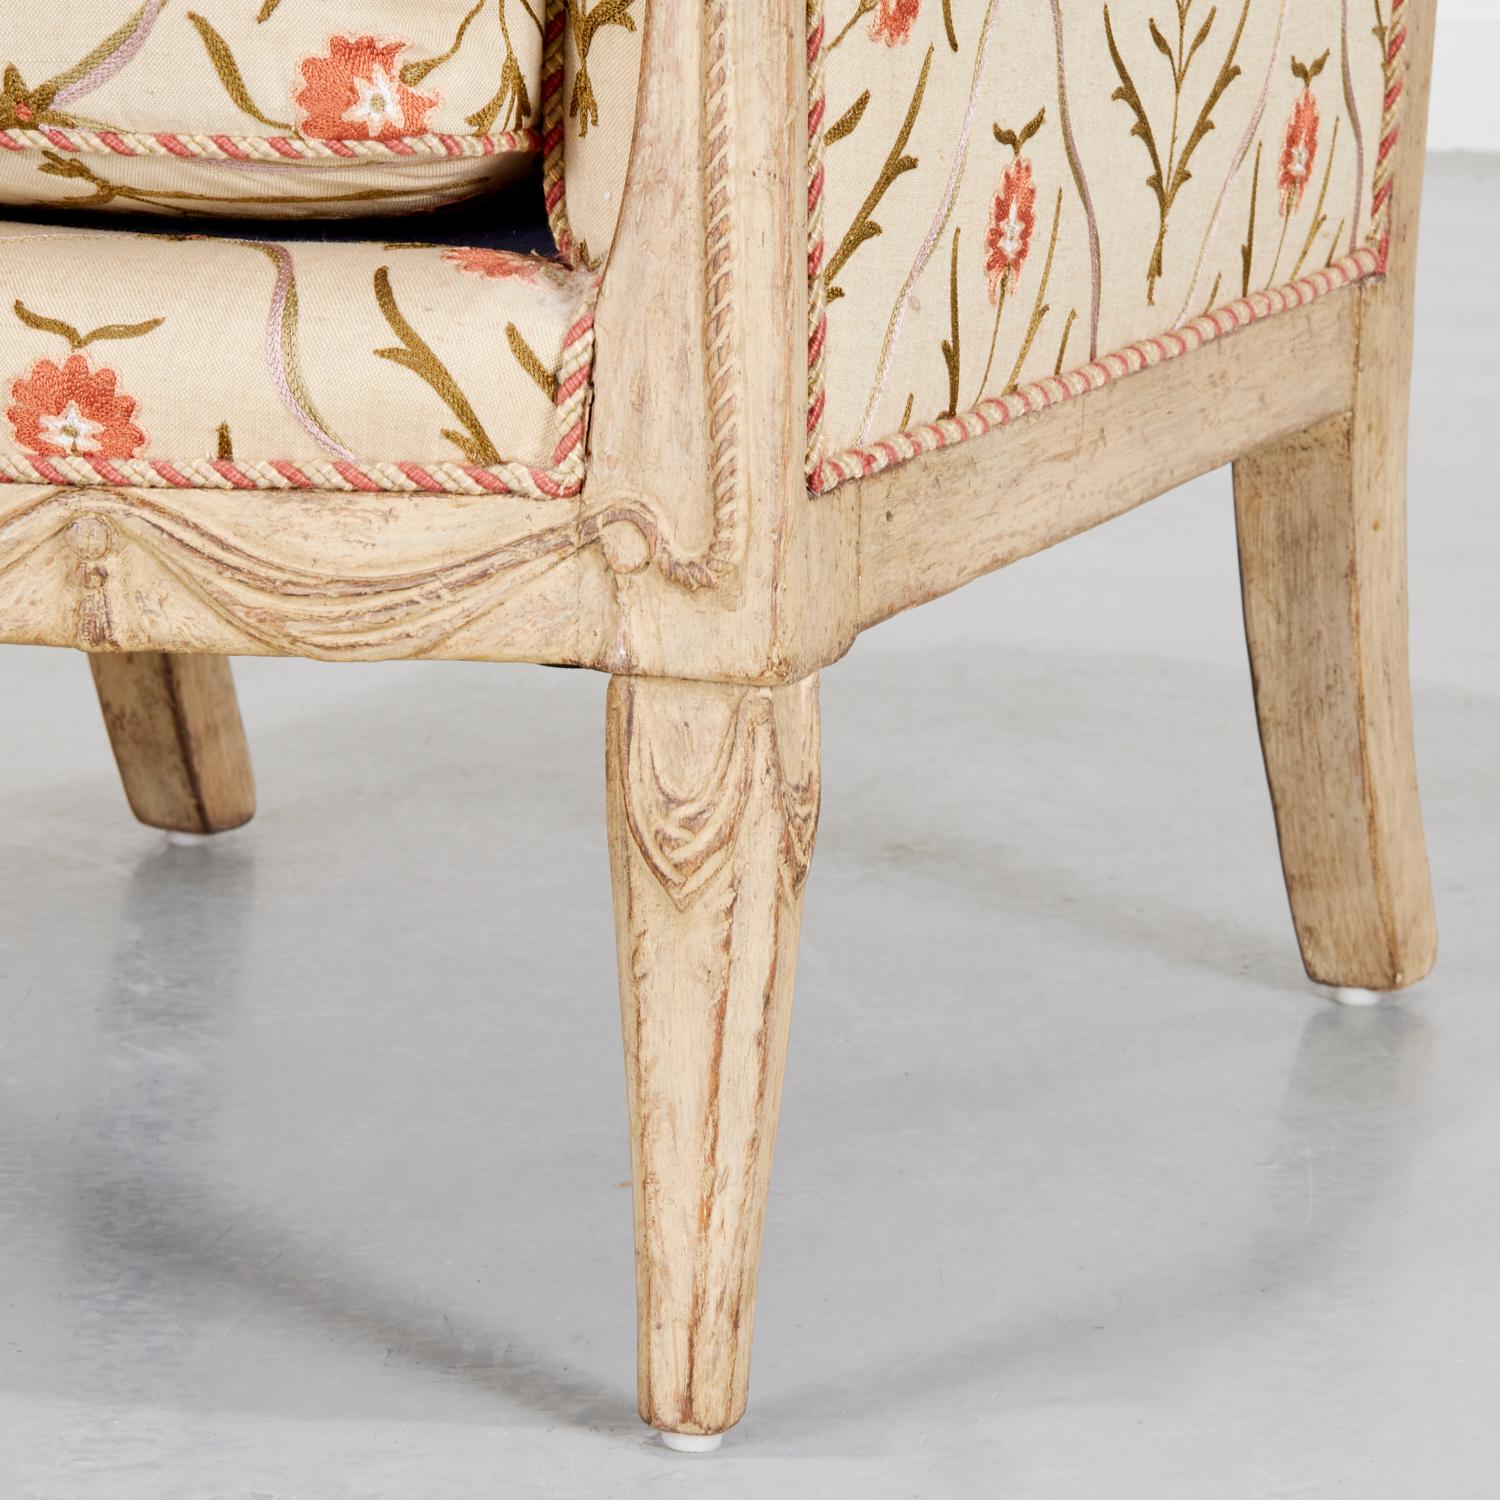 Late 20th Century 20th C. Directoire Style Painted and Floral Crewelwork Upholstered Bregere For Sale